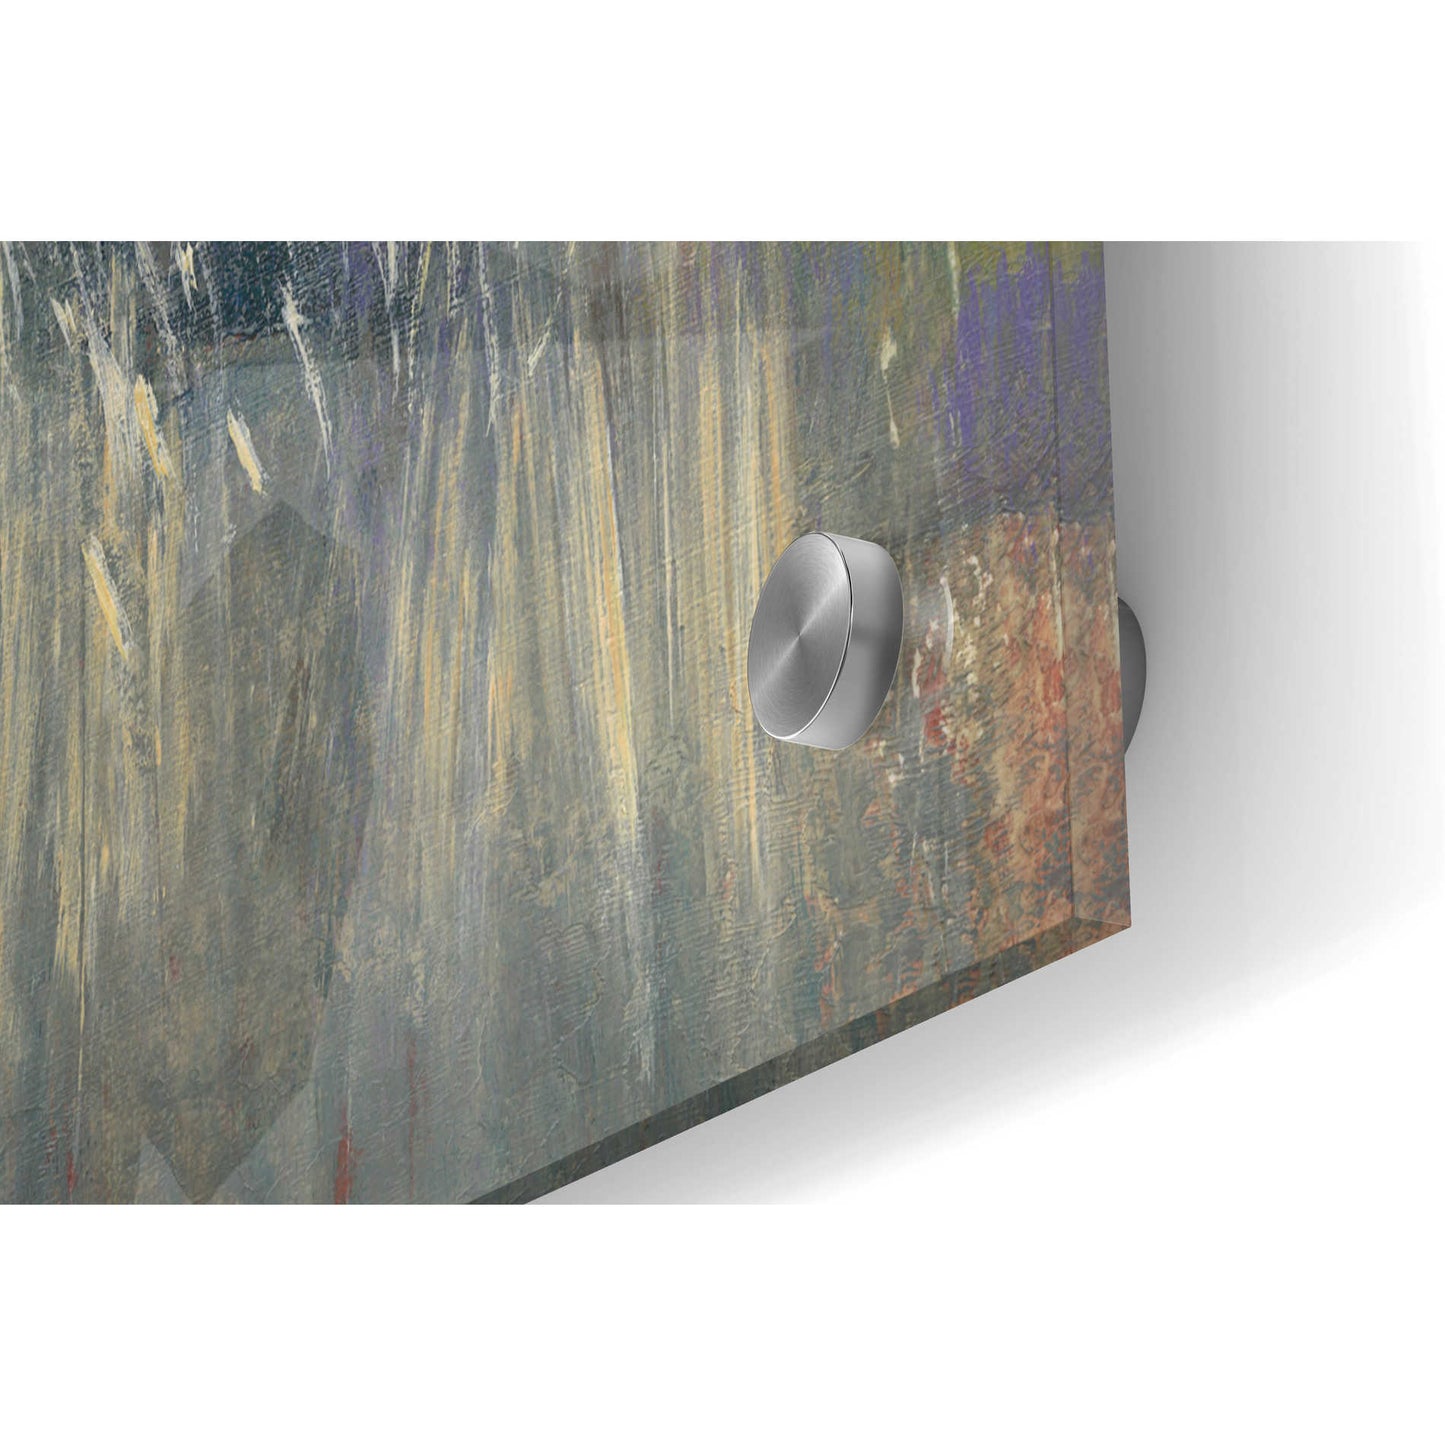 Epic Art 'View From the Top I' by Tim O'Toole, Acrylic Glass Wall Art,36x24